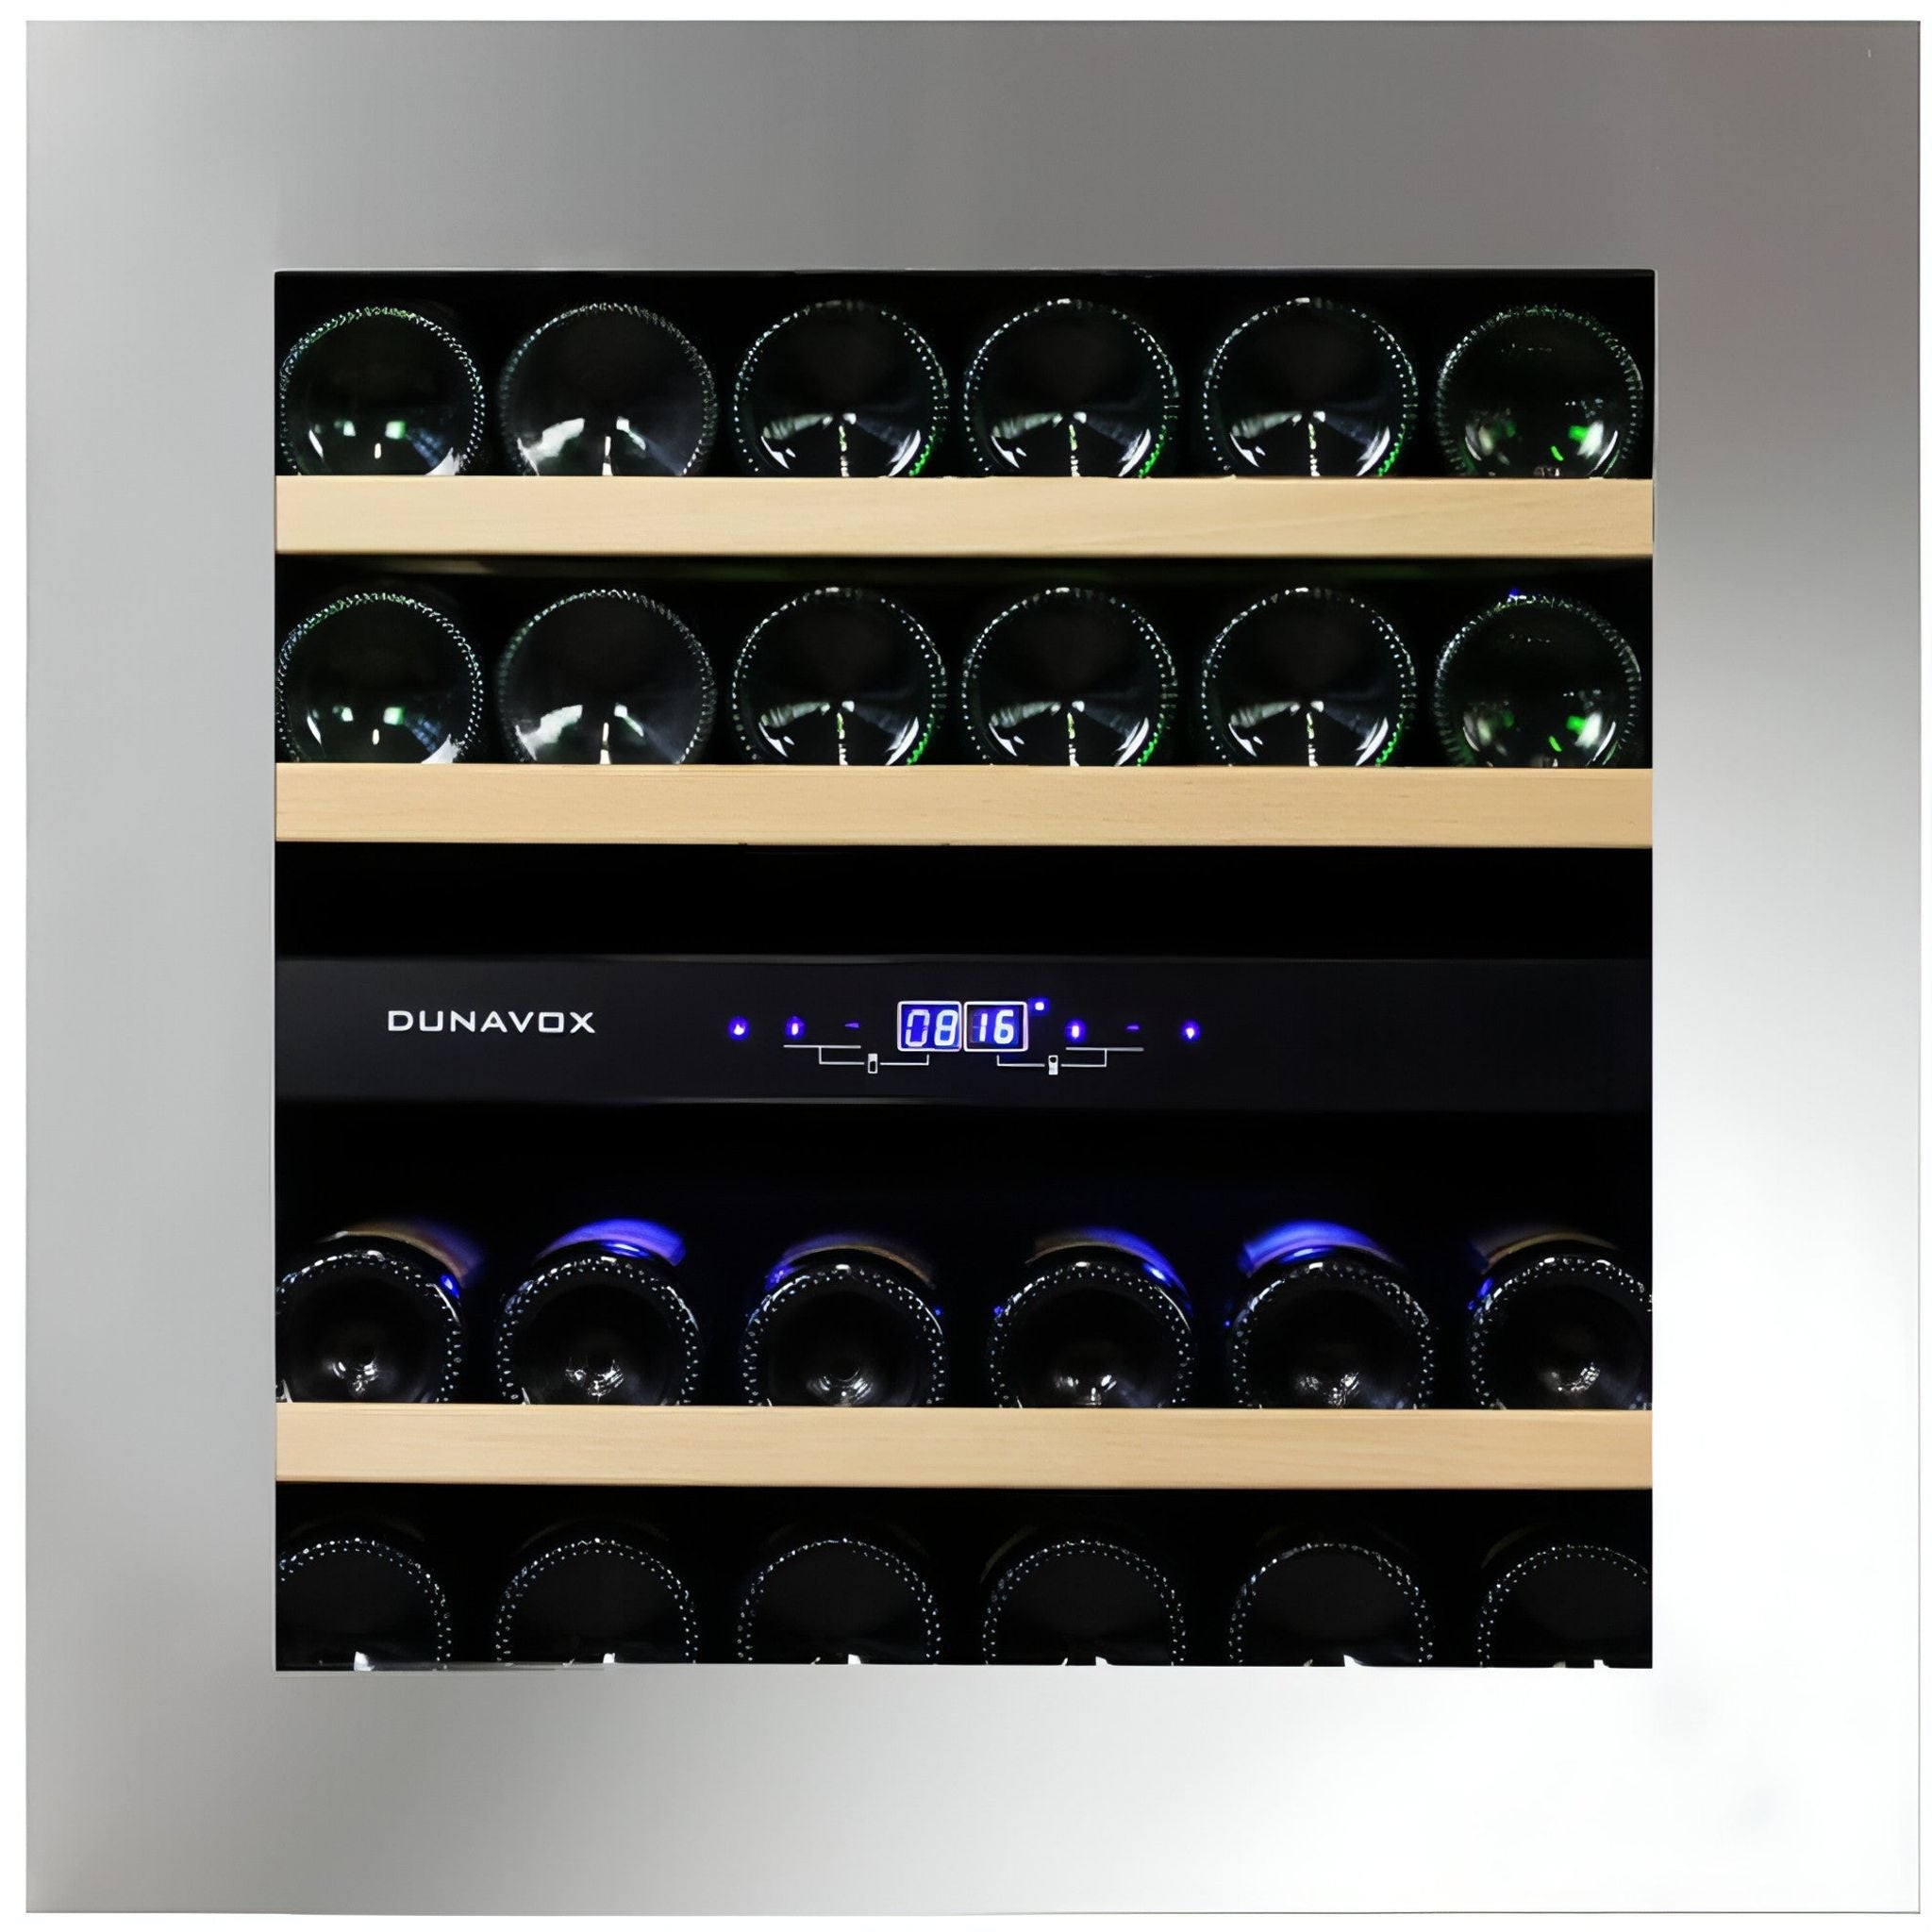 Dunavox GLANCE-25 - Dual Zone 25 Bottle - Integrated Wine Cooler - DAVG-25.63DSS.TO